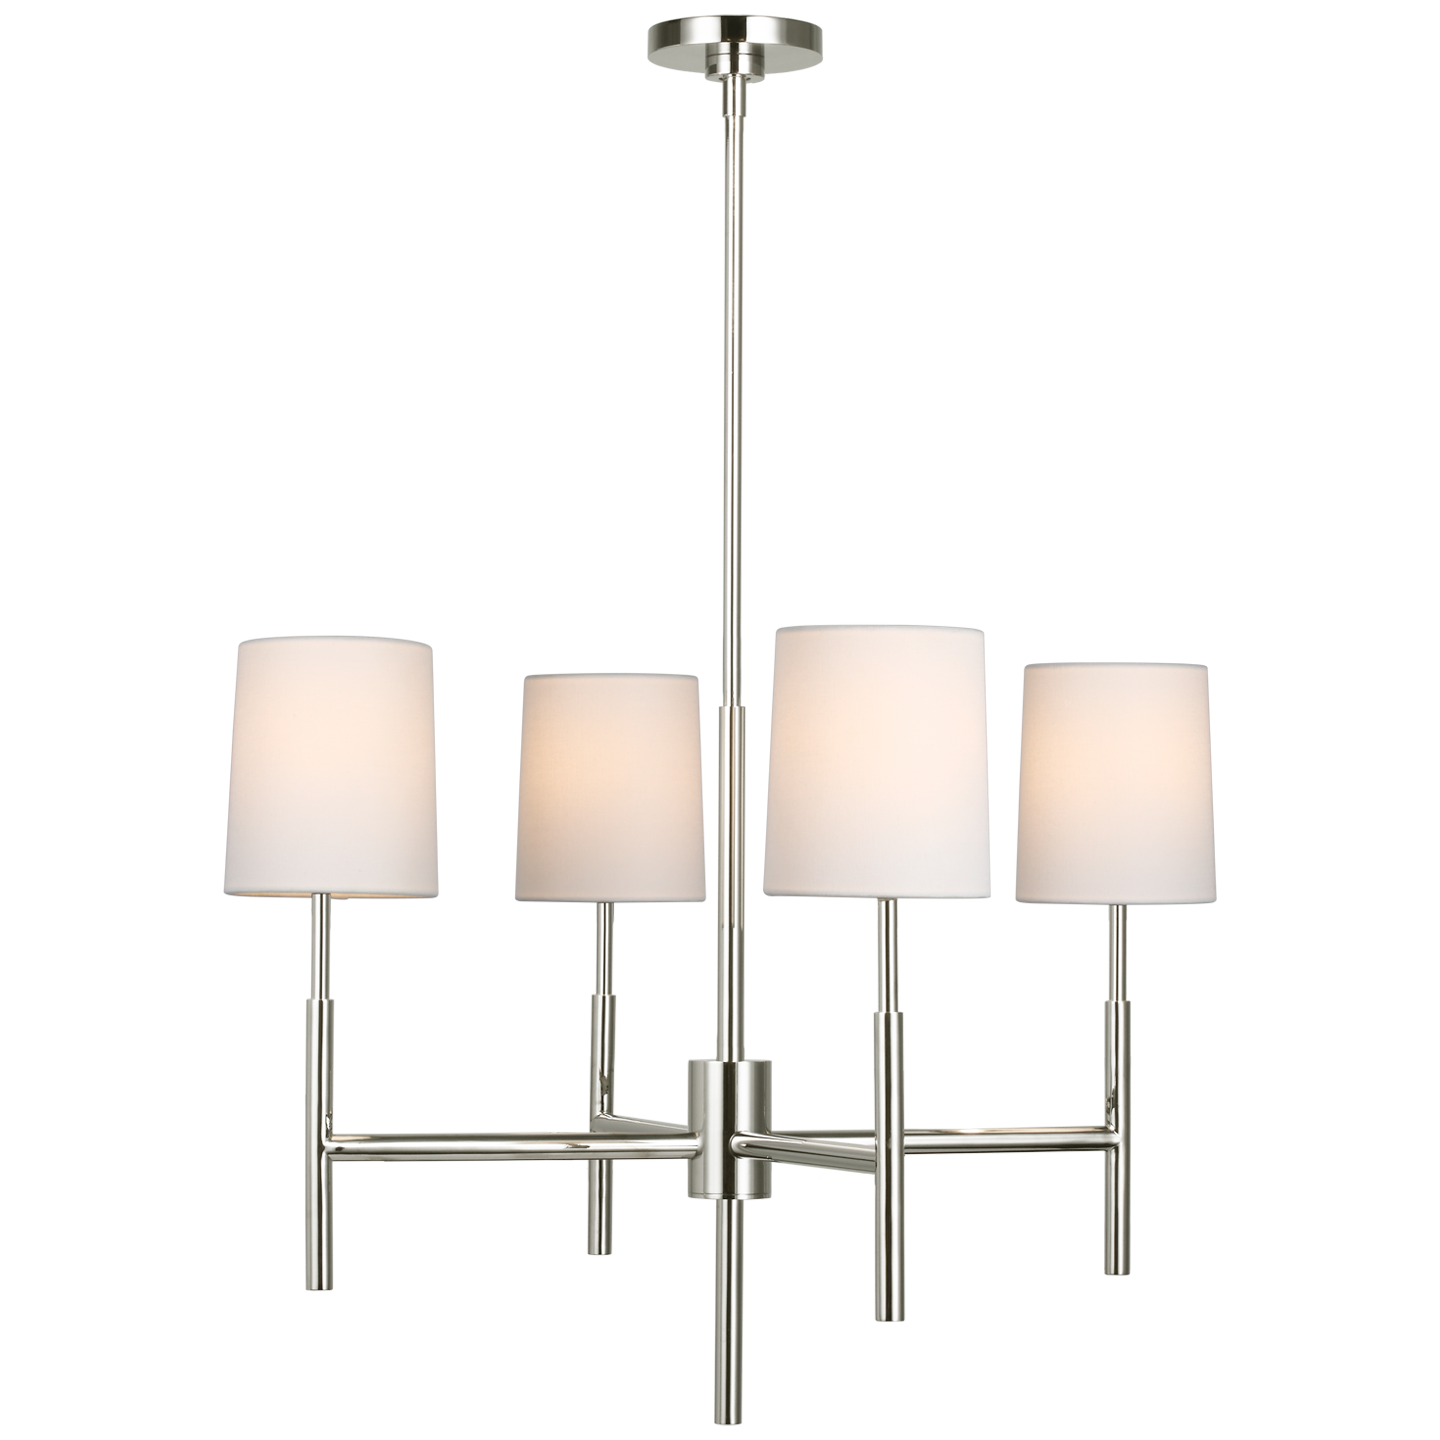 The thin arms of this Clarion Small Chandelier bring a sleek, modern look to any space. The linen shade brings a soft, elegant glow to any bedroom, dining room, or other area.   Designer: Barbara Barry